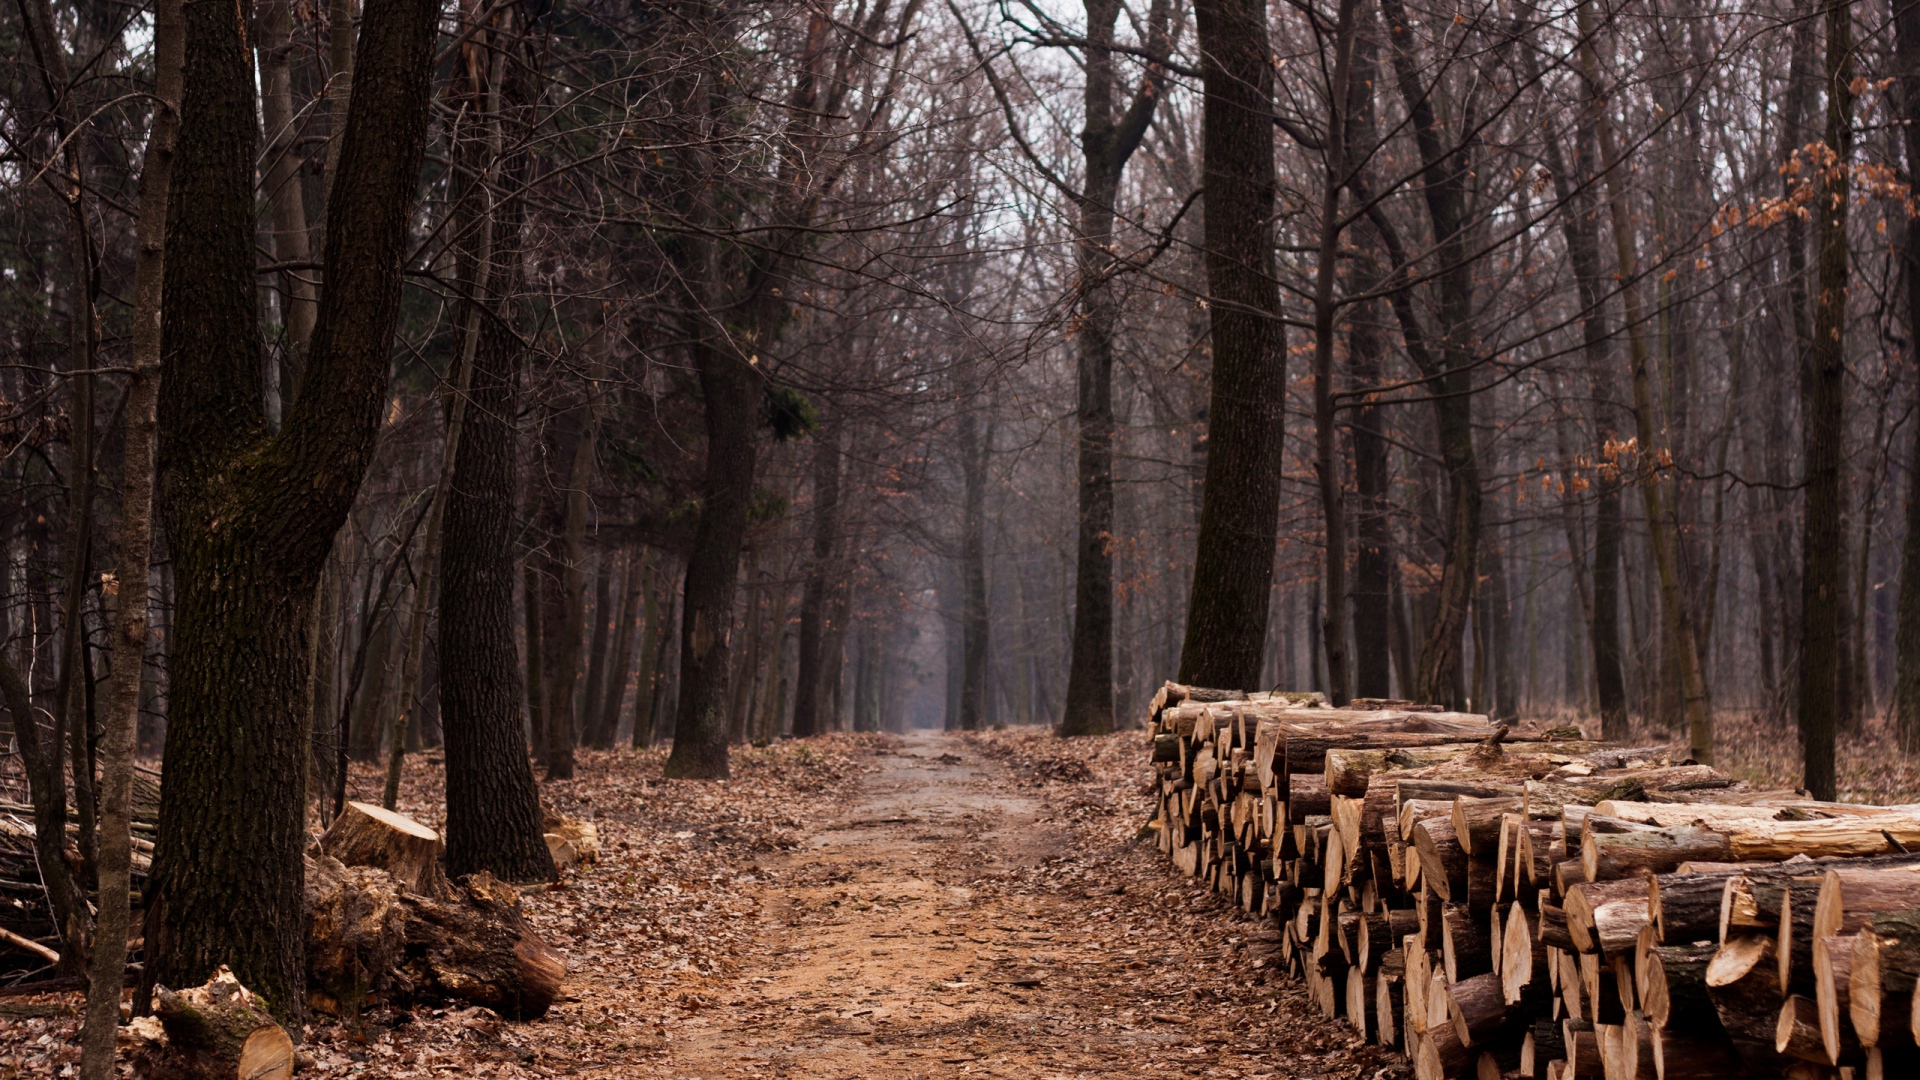  wood logs firewood from wallpapers4uorg your wallpaper news 1920x1080